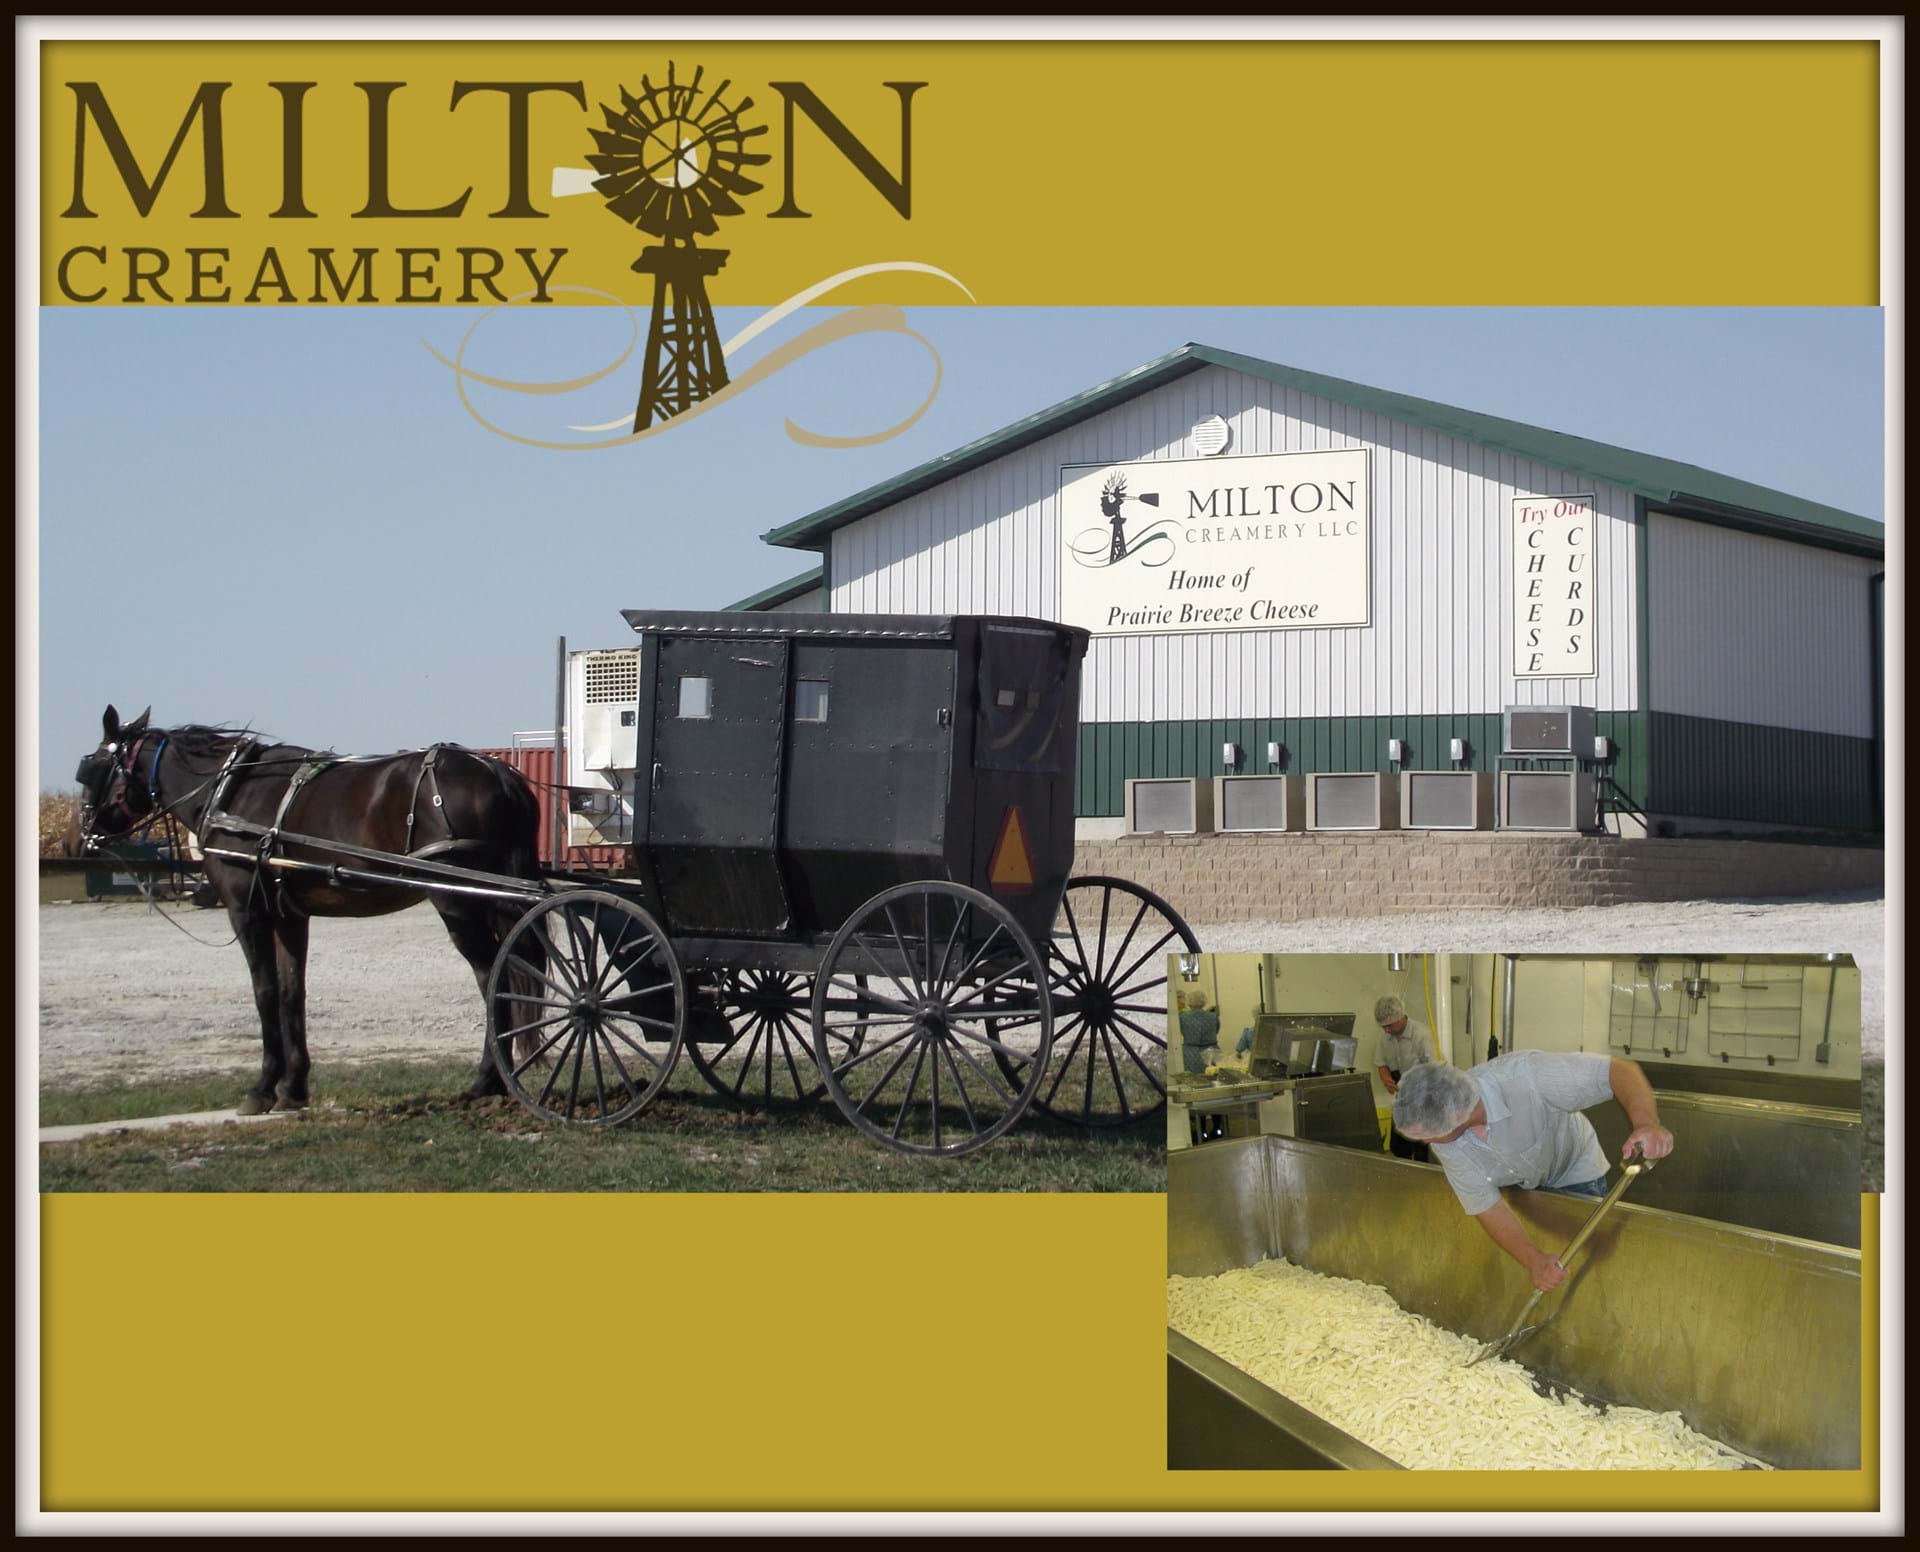 You can always find great cheese at Milton Creamery